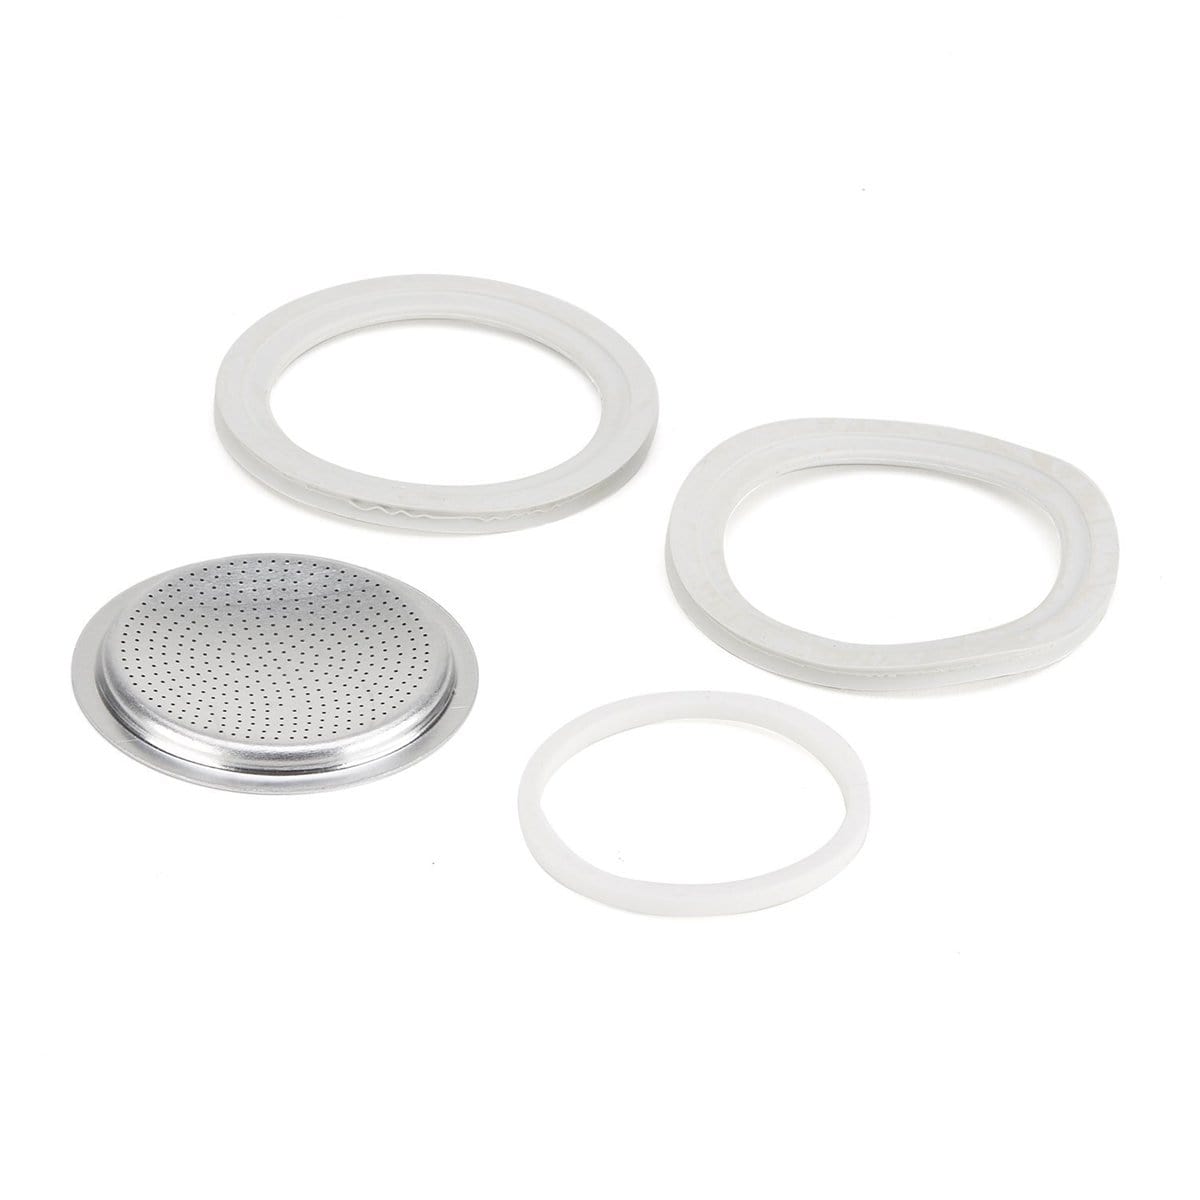 Bialetti Moka Express – 6 Cup Replacement Gasket/Filter